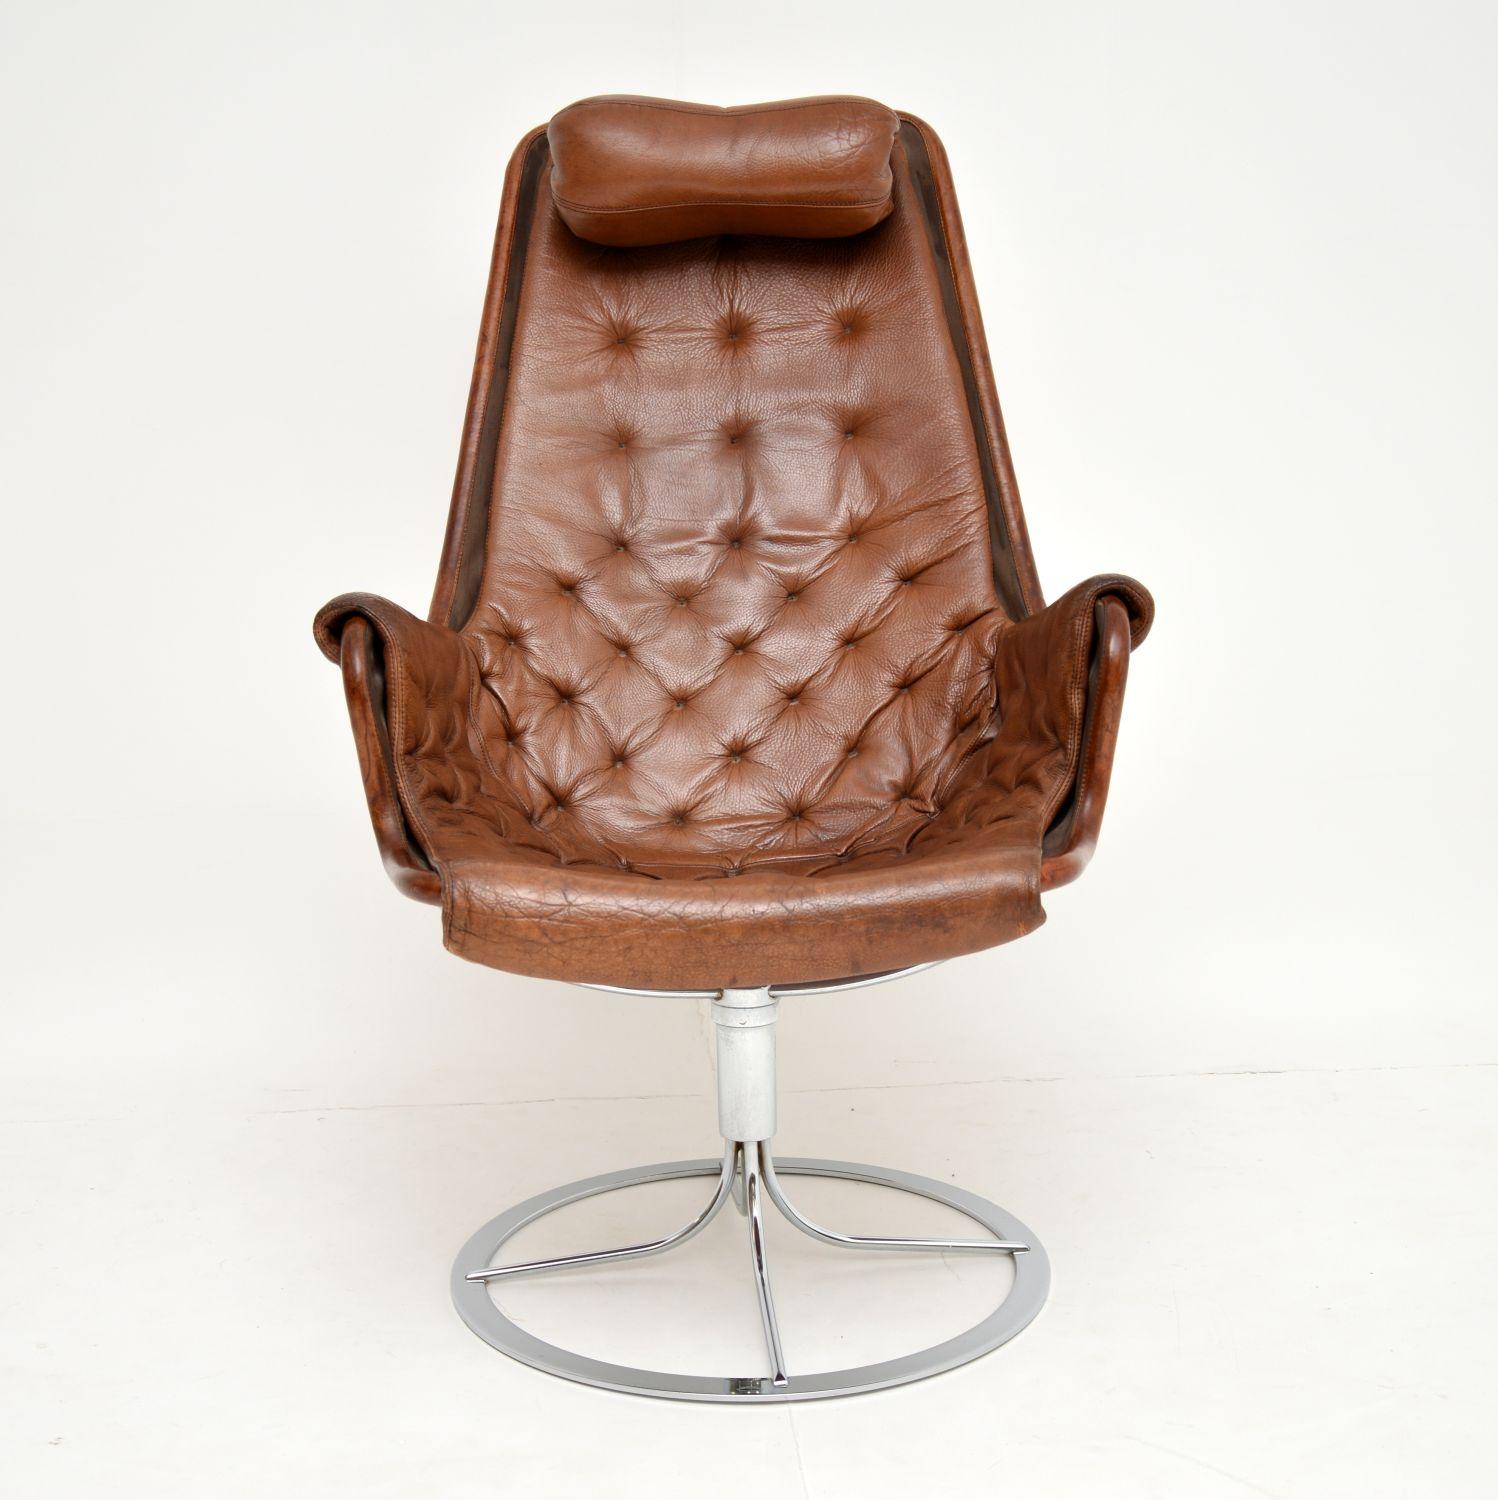 Swedish Vintage Leather and Chrome Jetson Chair by Bruno Mathsson for DUX